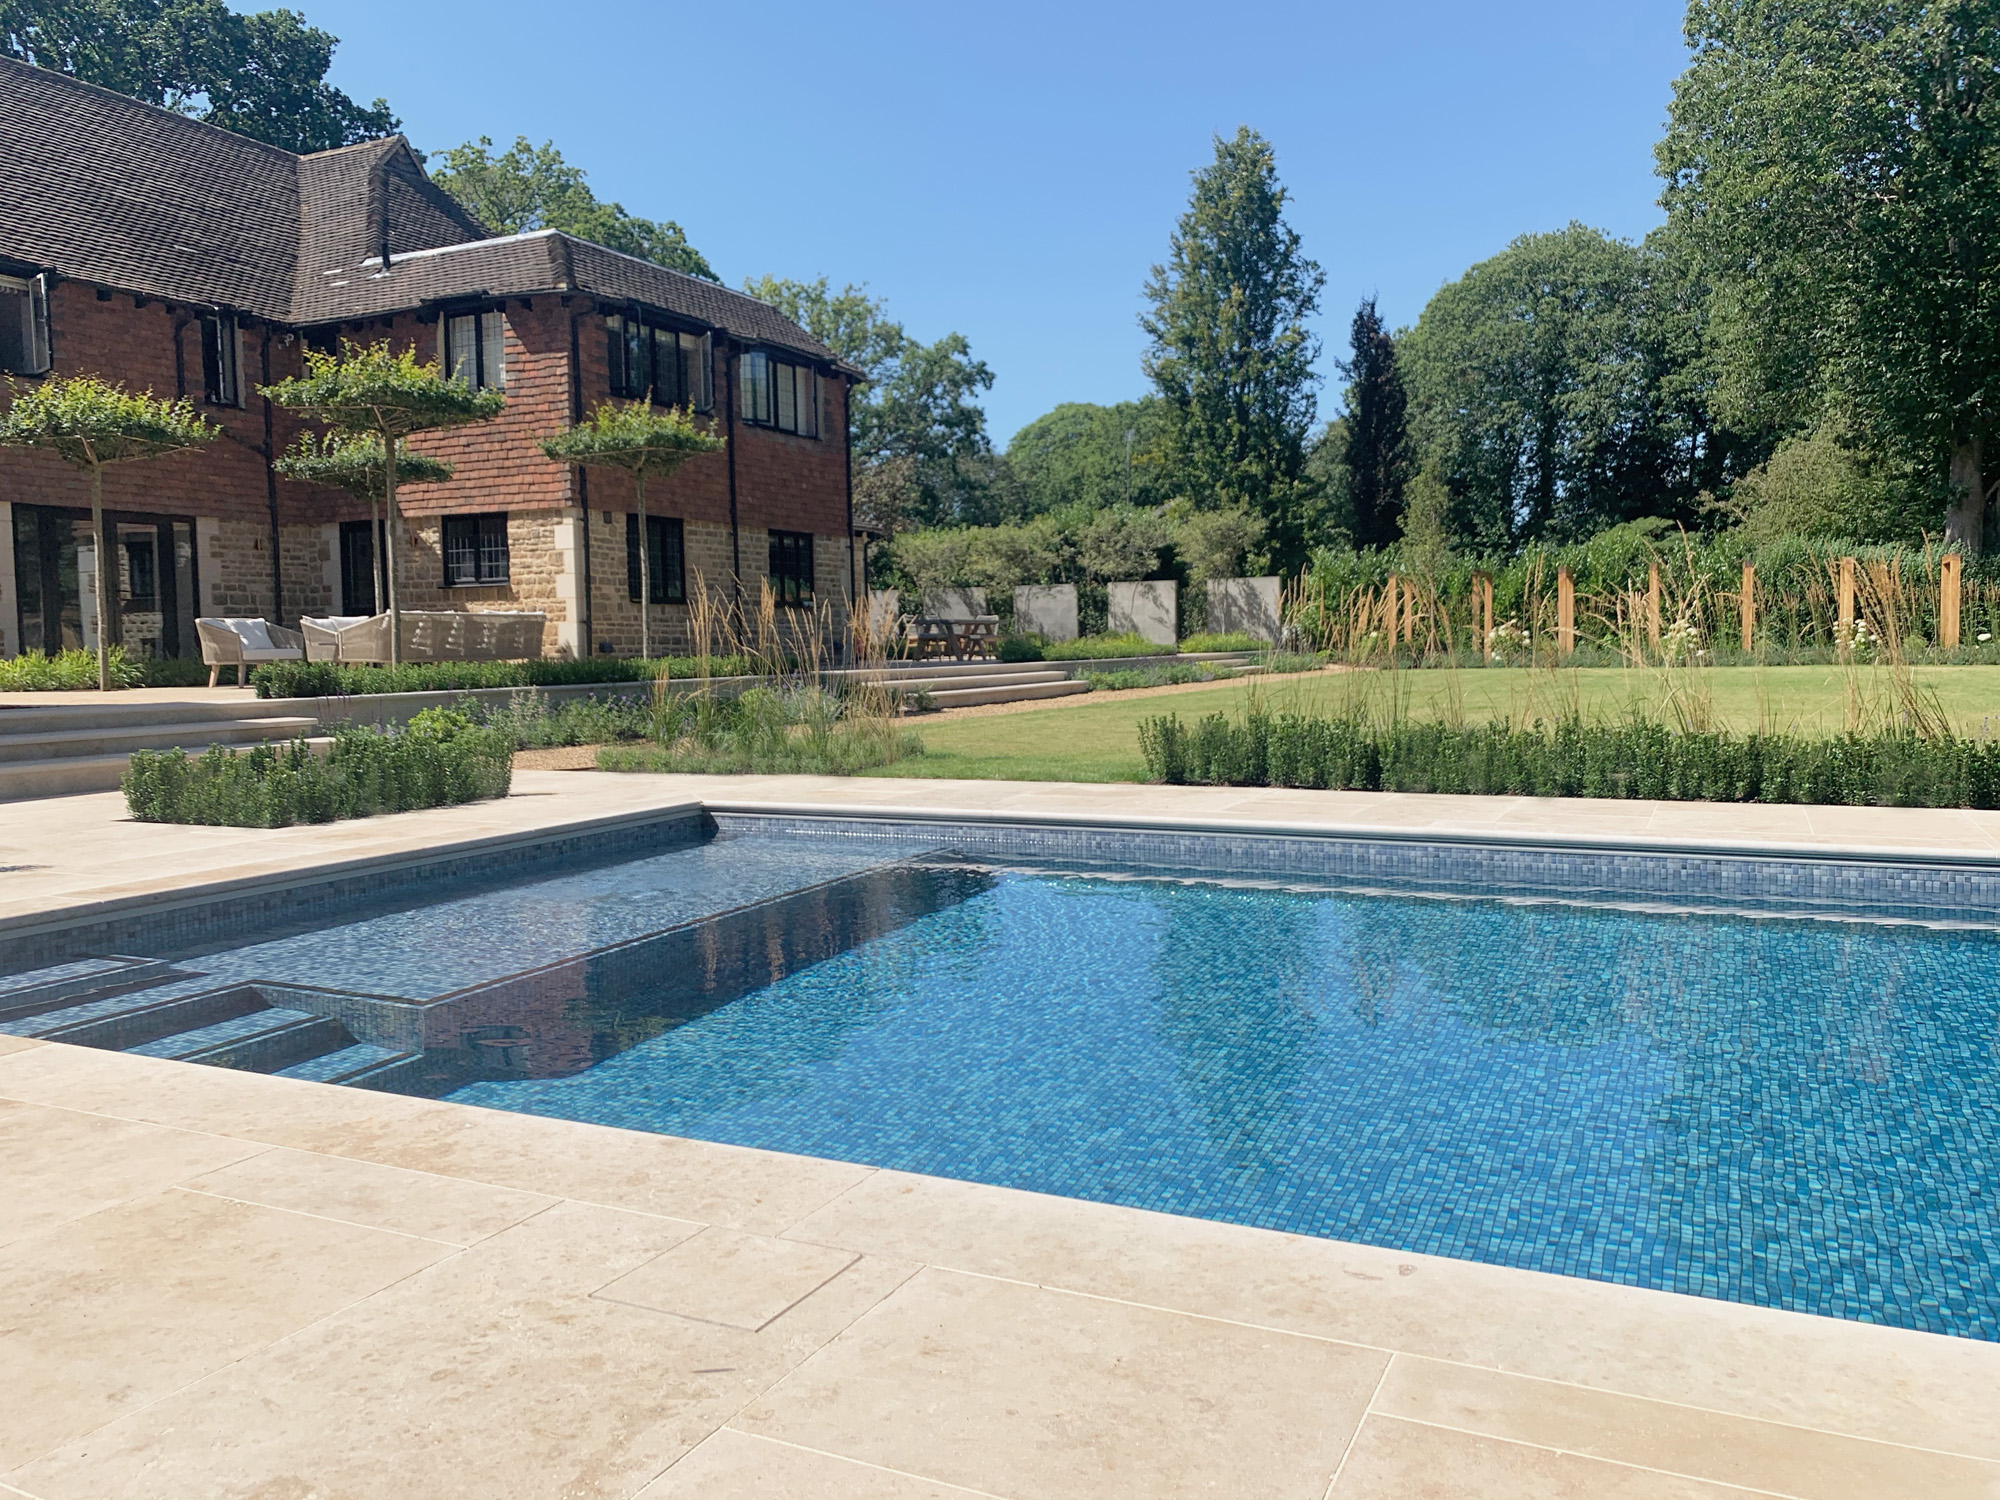 Swimming Pool by Pollyanna Wilkinson - contemporary landscape and garden design in London